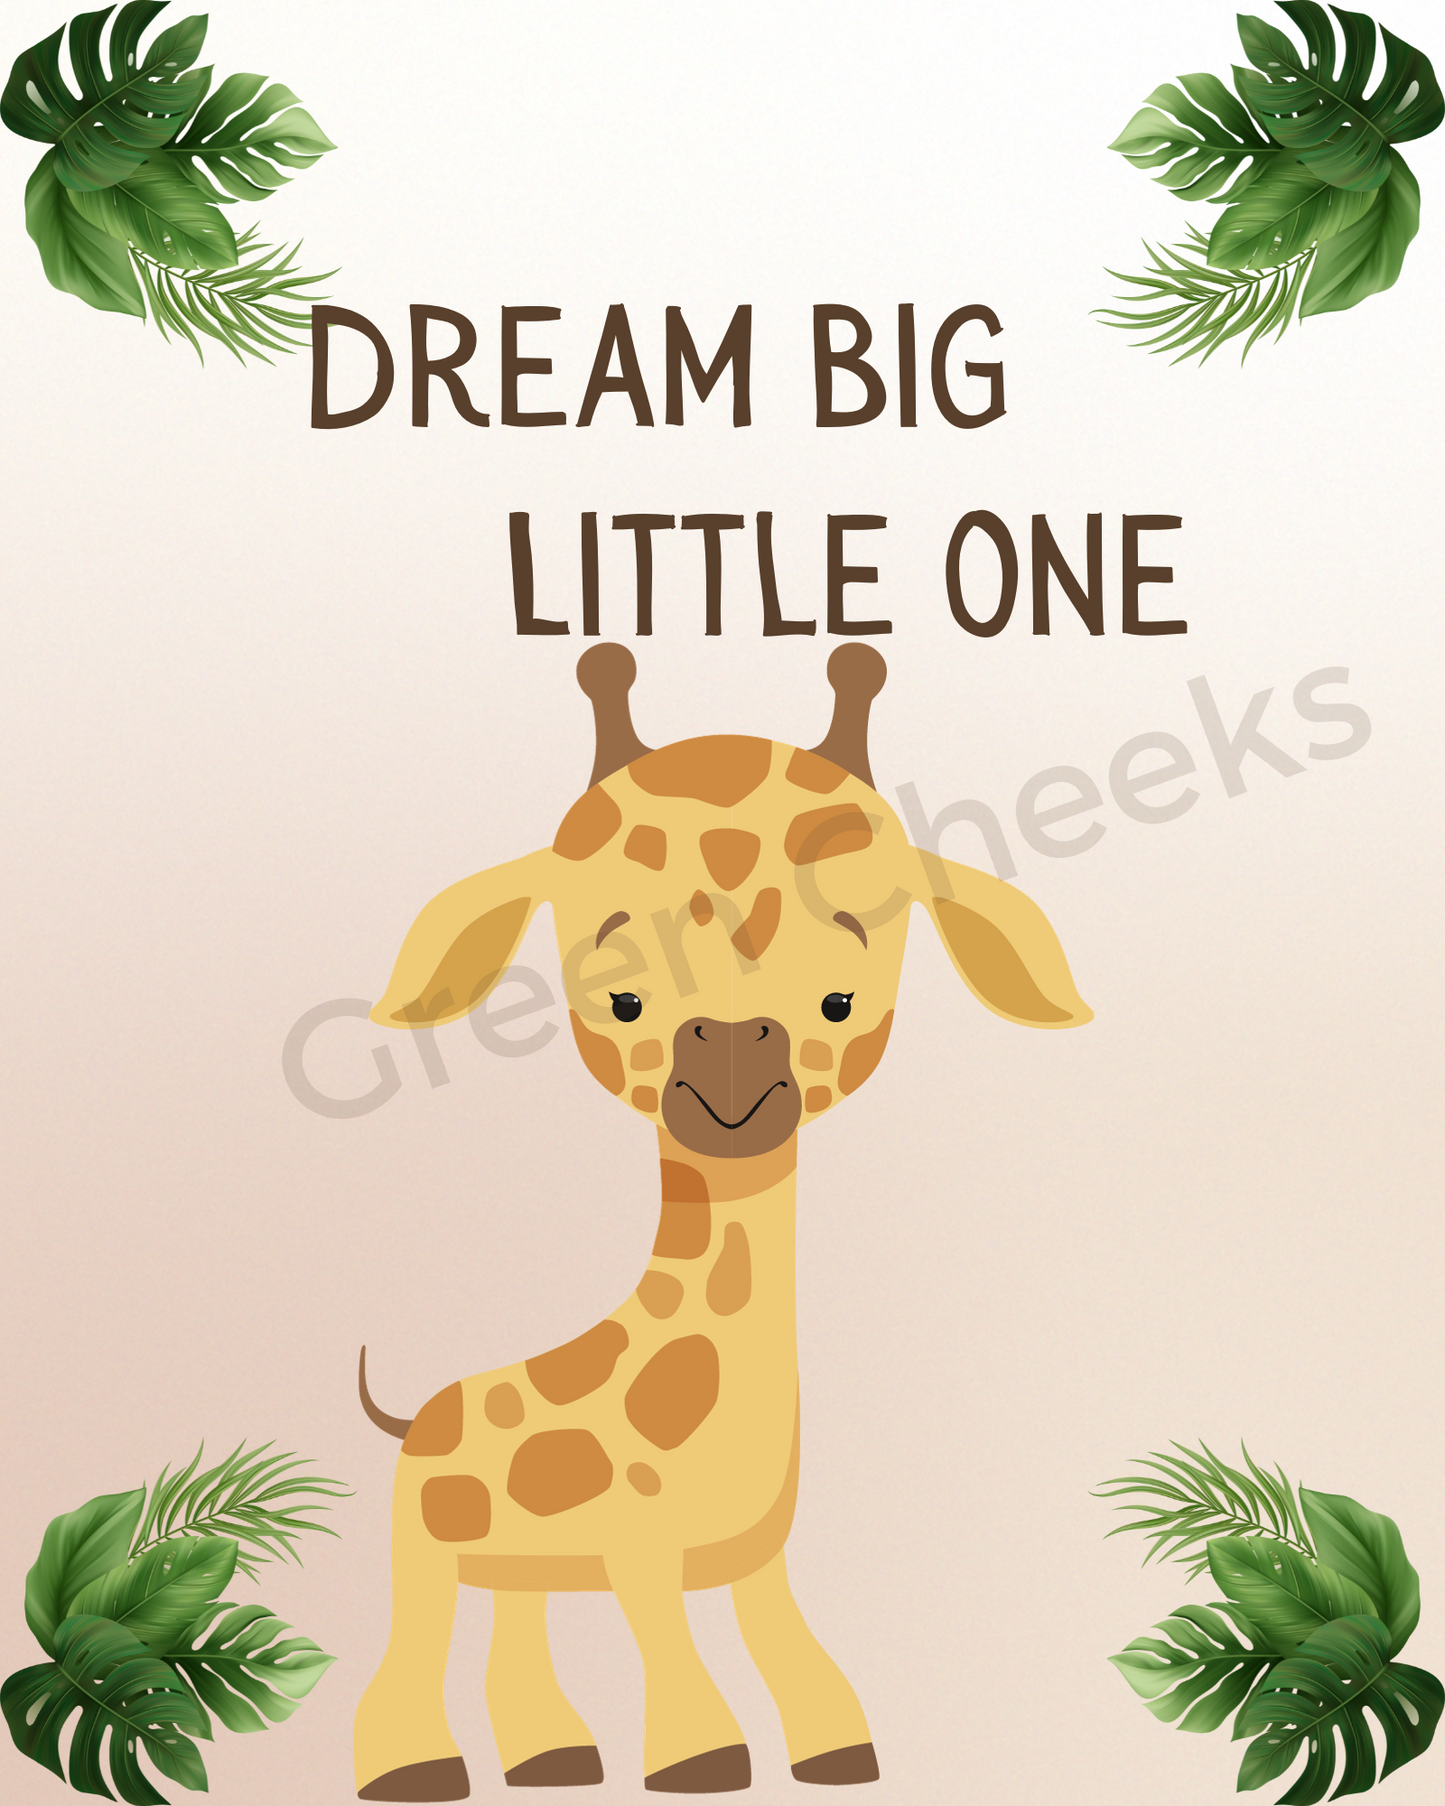 Choice of Eight Jungle Animal Prints for Baby Bedroom or Nursery - Canvas Prints